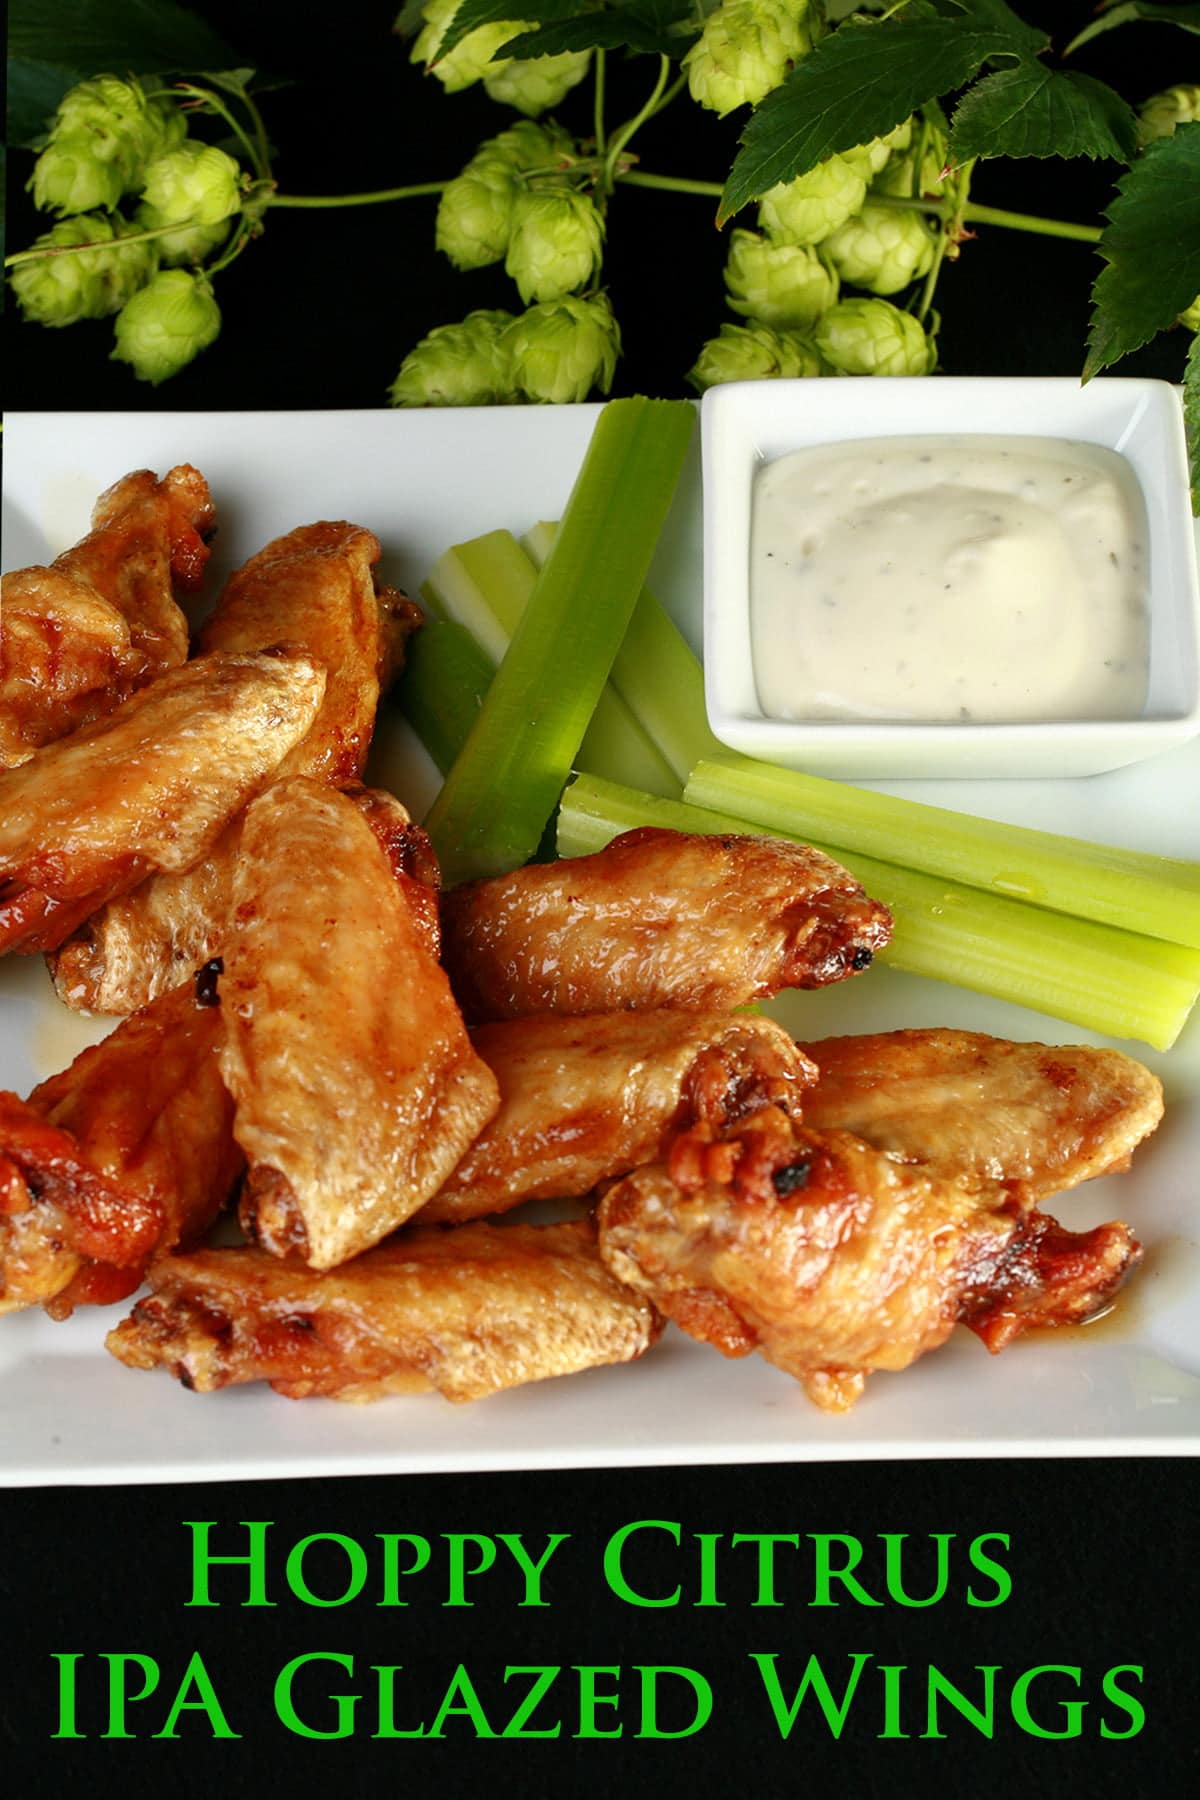 A plate of deep fried, Hoppy Citrus IPA Glazed Wings. They;re on a plate with celery sticks and a little bowl of ranch sauce, and the plate is surrounded by fresh hop bines.